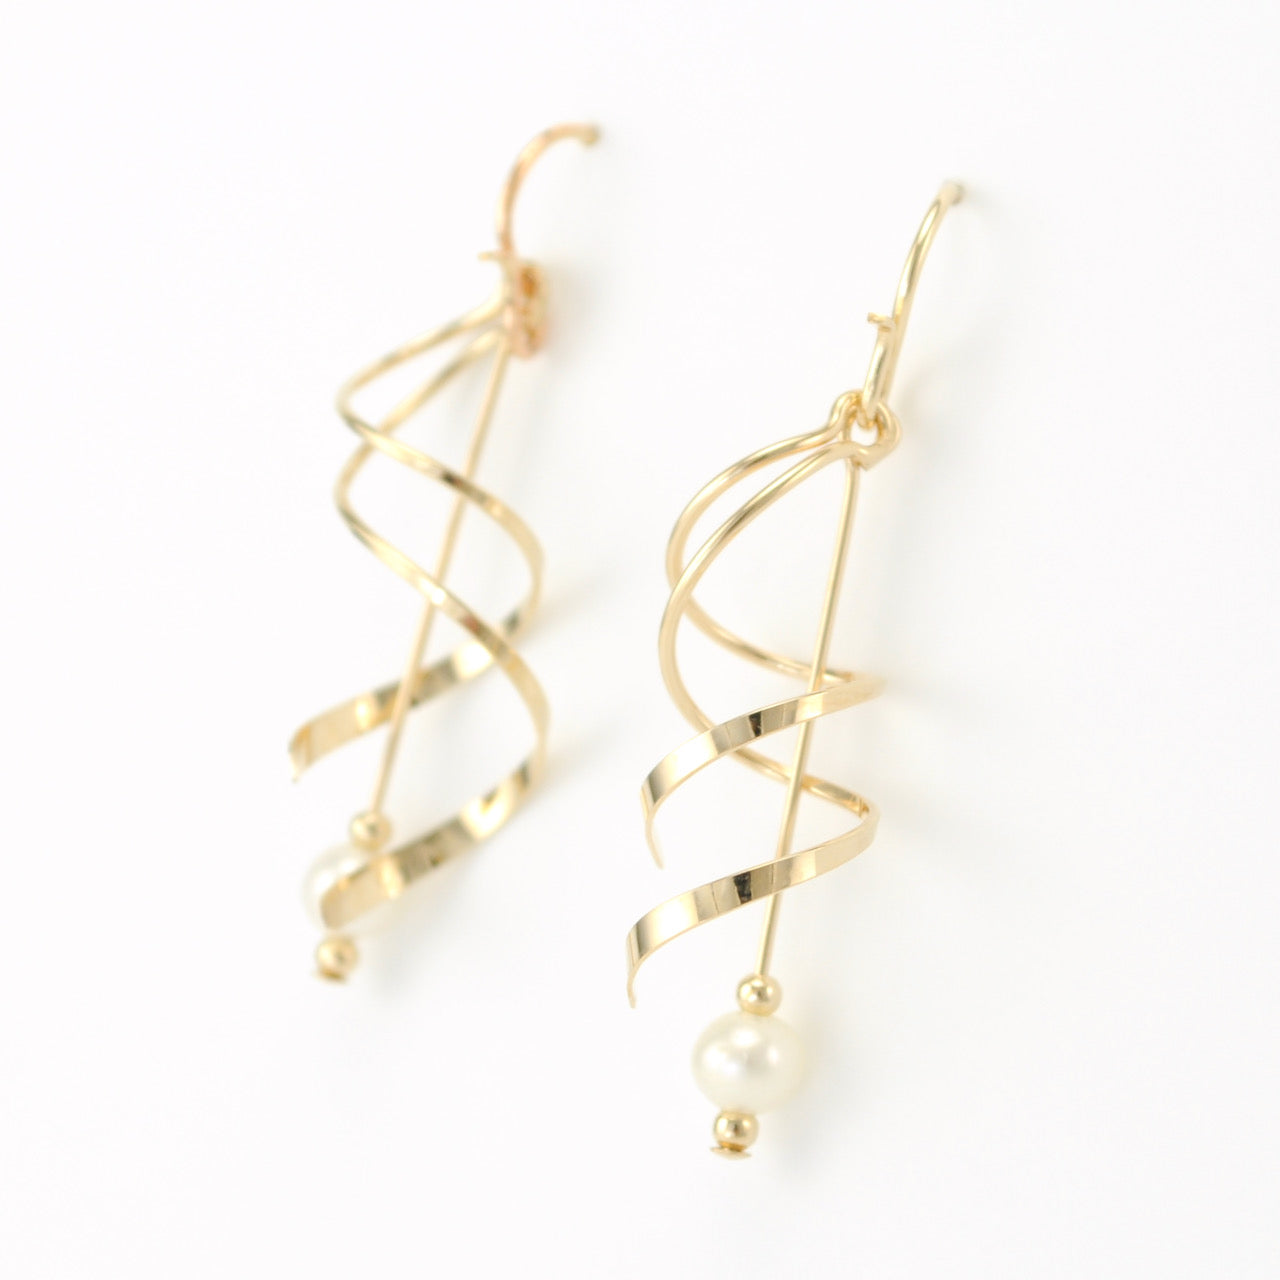 Side View Gold Fill Curl with White Pearl Earrings